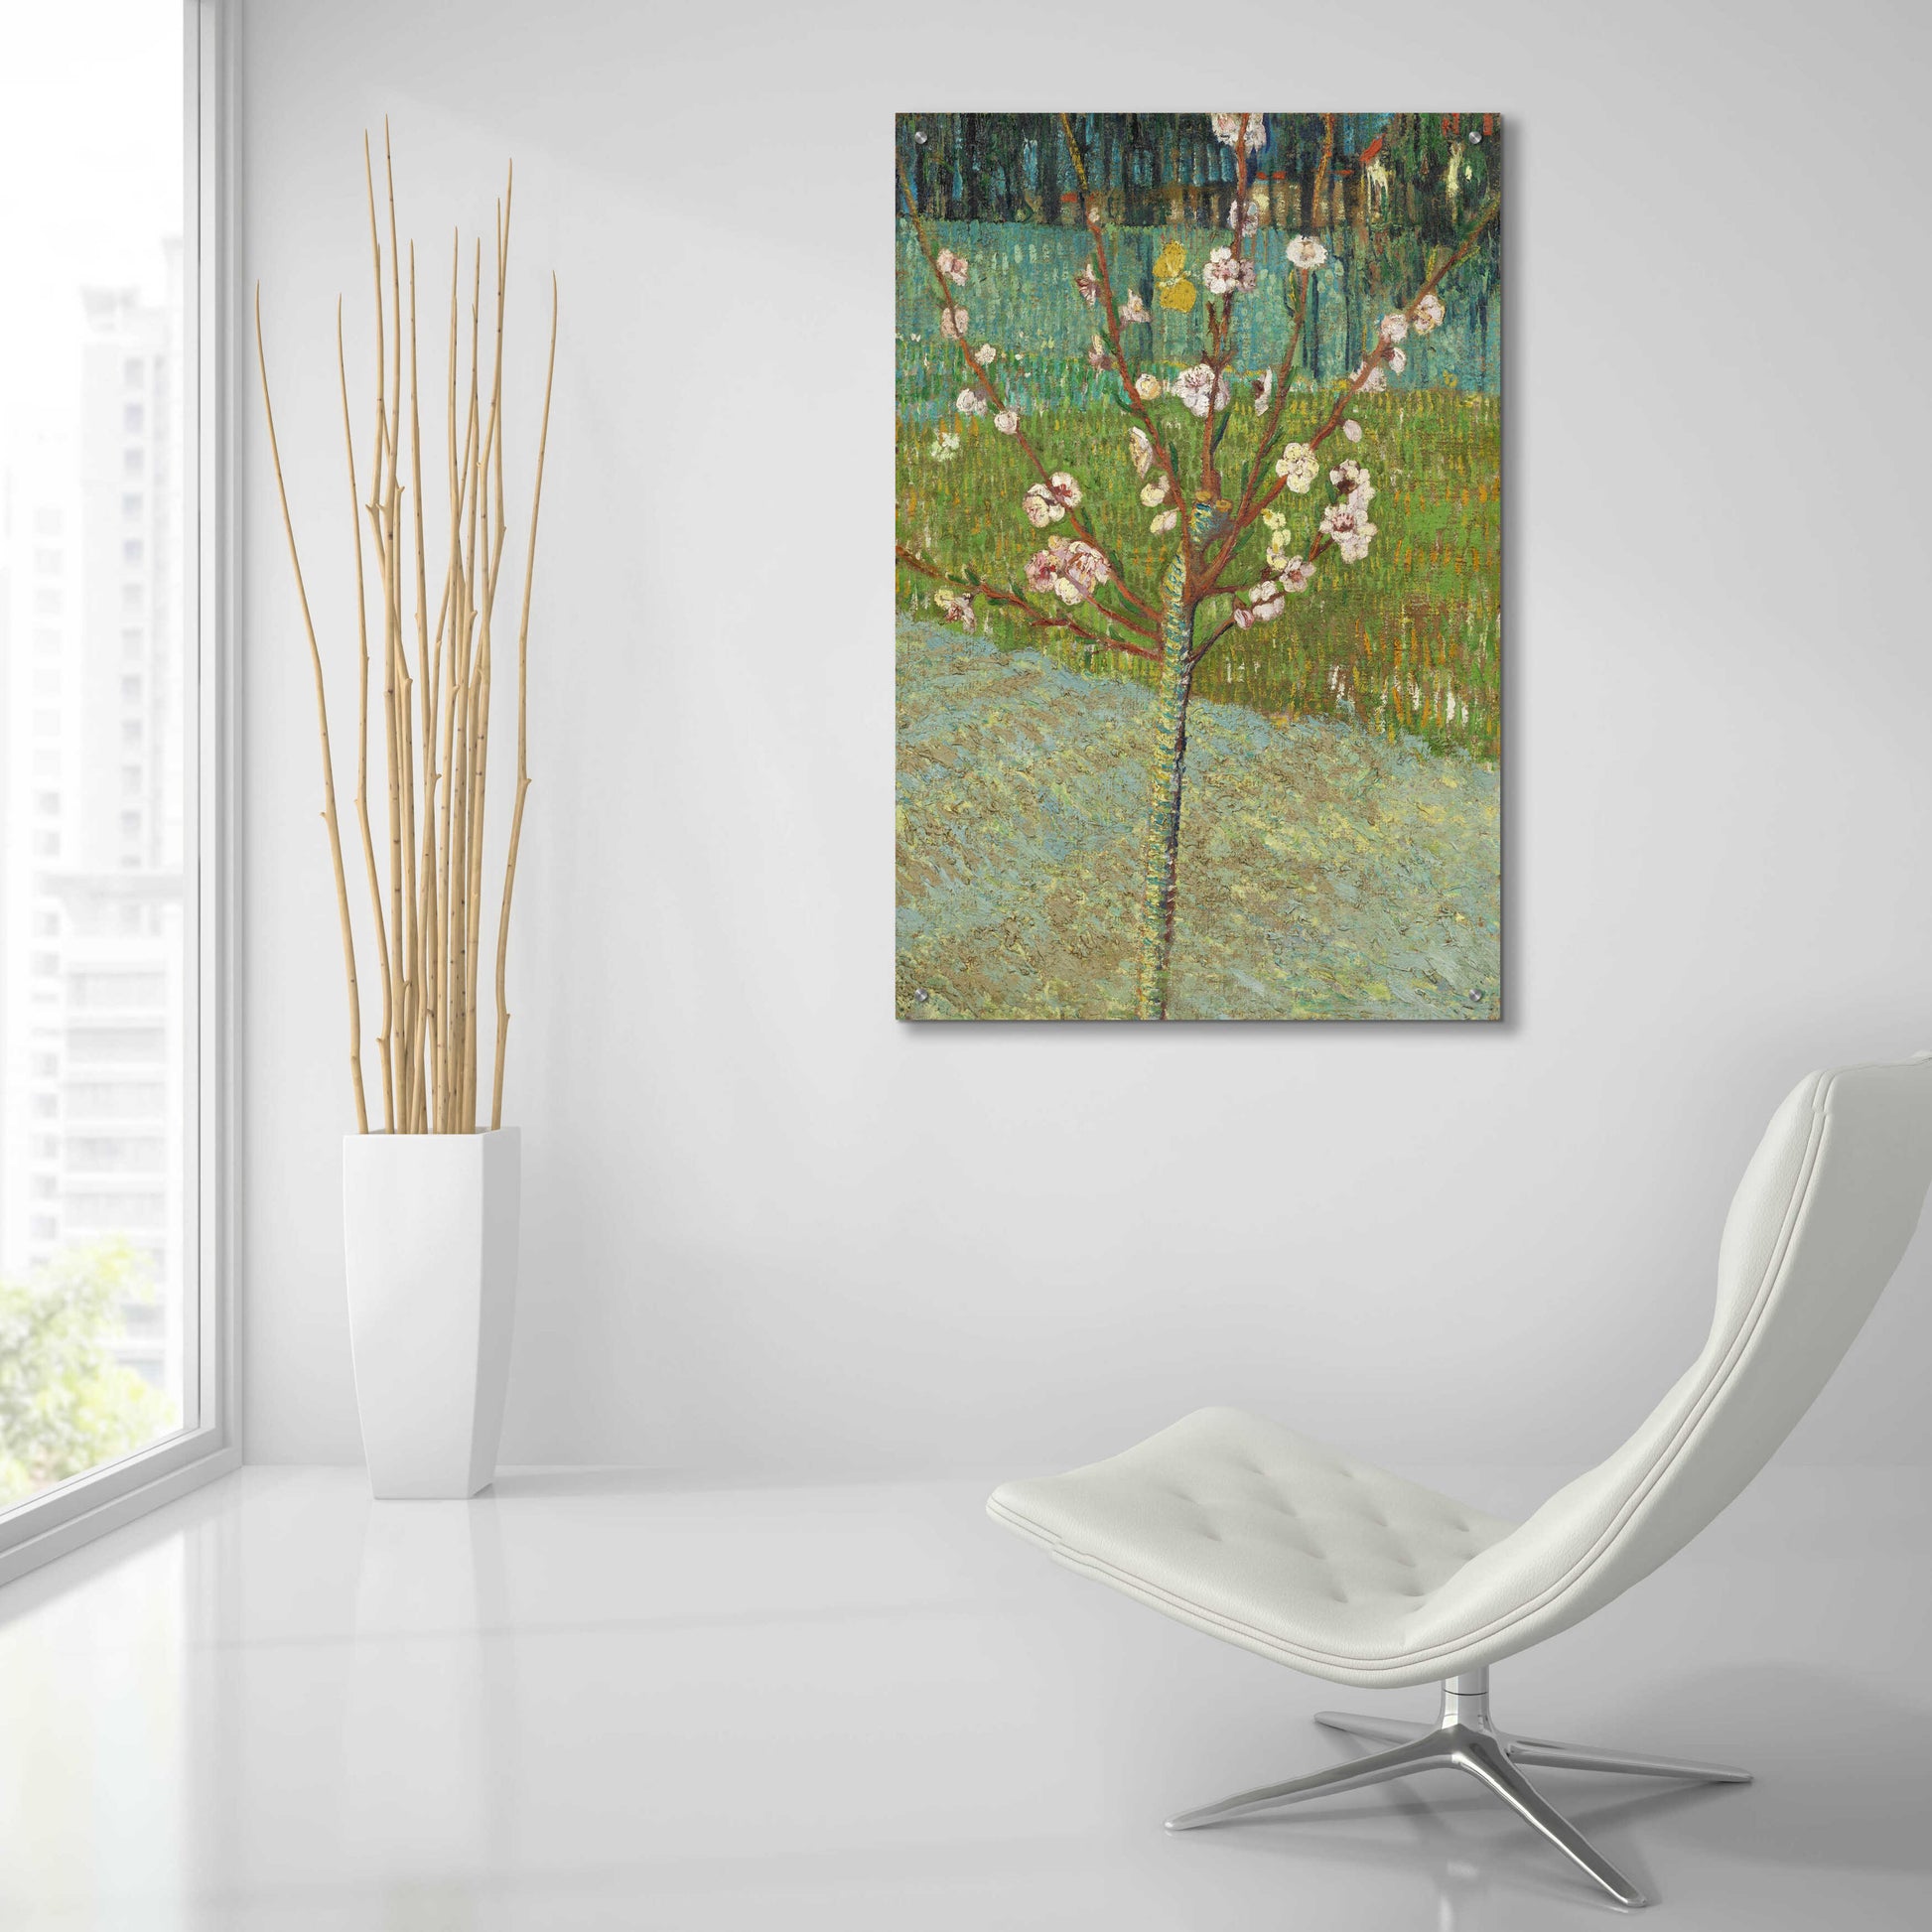 Epic Art 'Peach Tree In Blossom' by Vincent Van Gogh, Acrylic Glass Wall Art,24x36